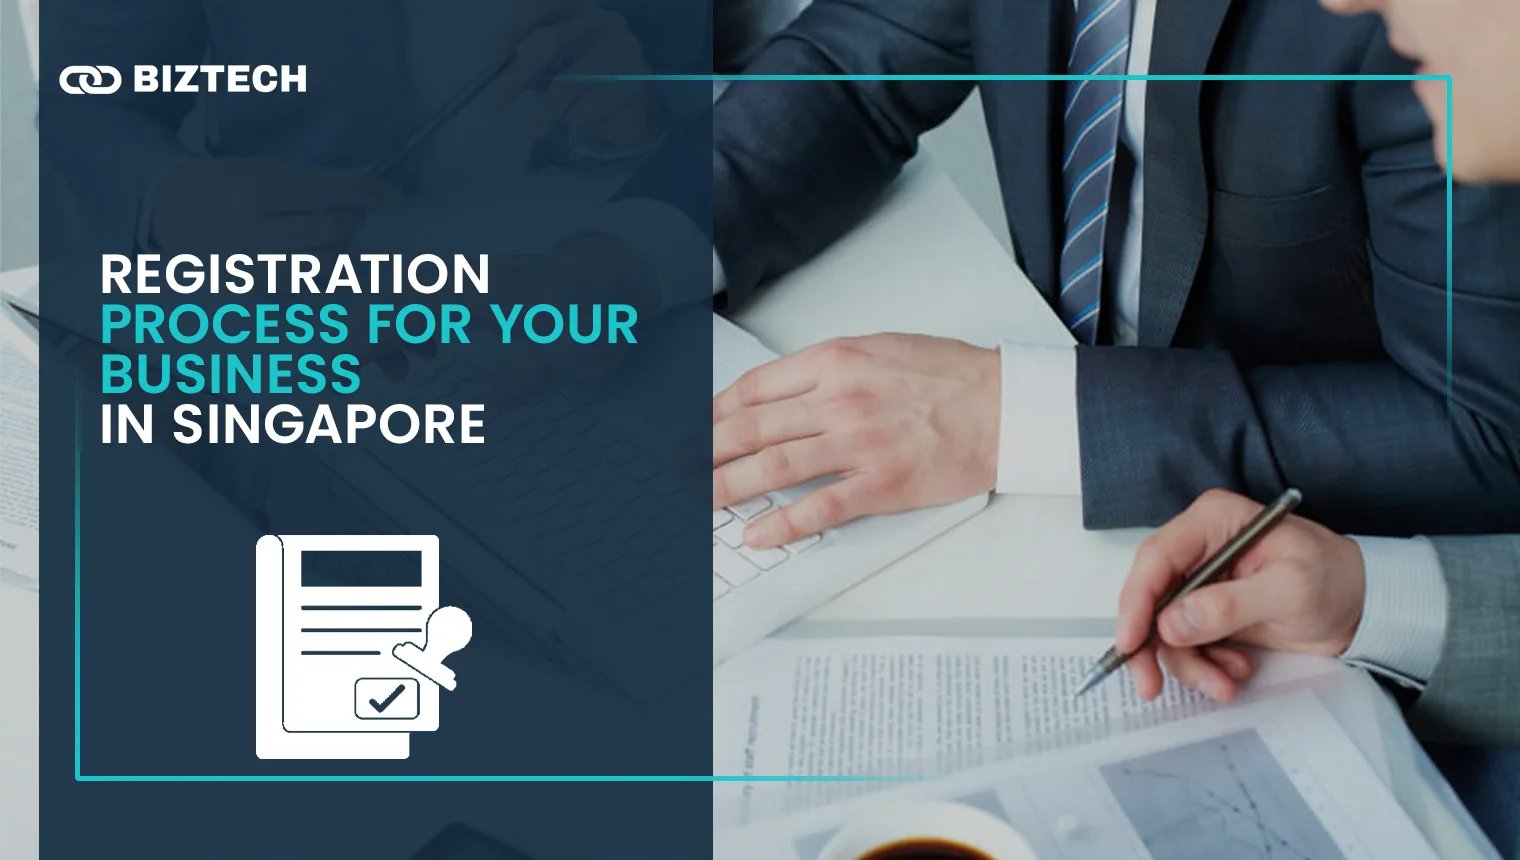 Registration Process For Your Business in Singapore